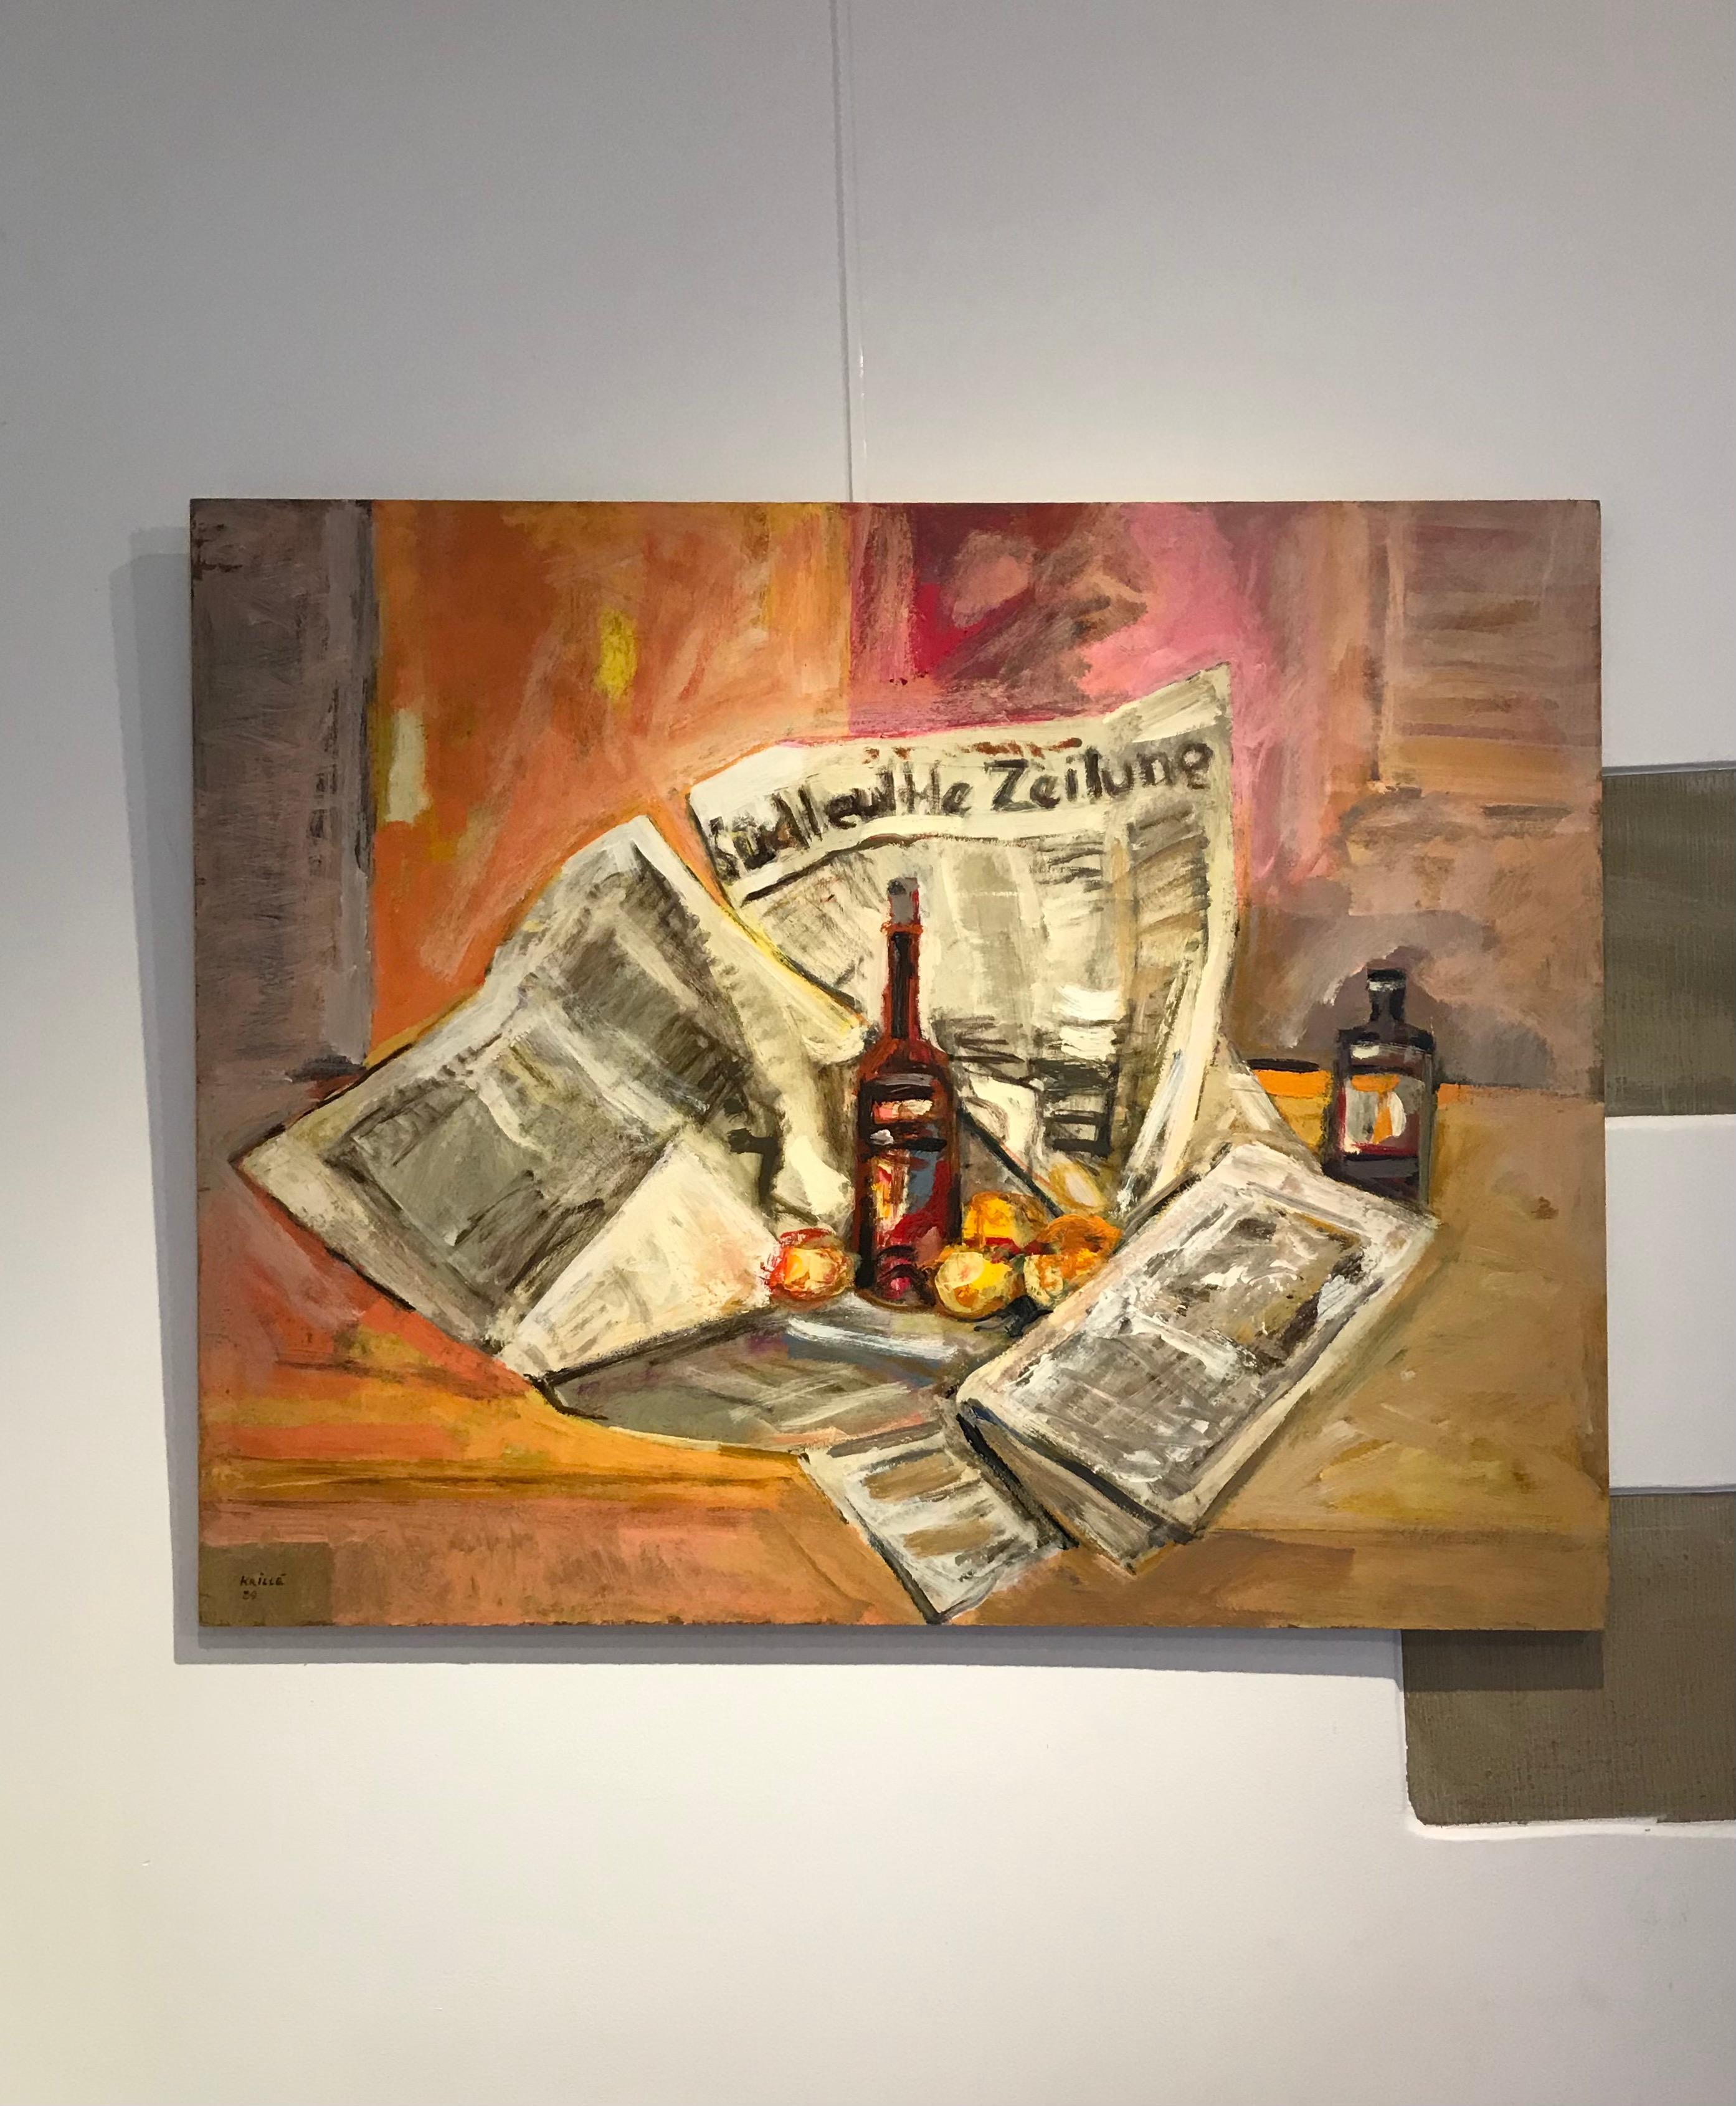 Still life with newspaper by Jean Krillé - Oil on wood 80x100 cm - Painting by Jean Krille